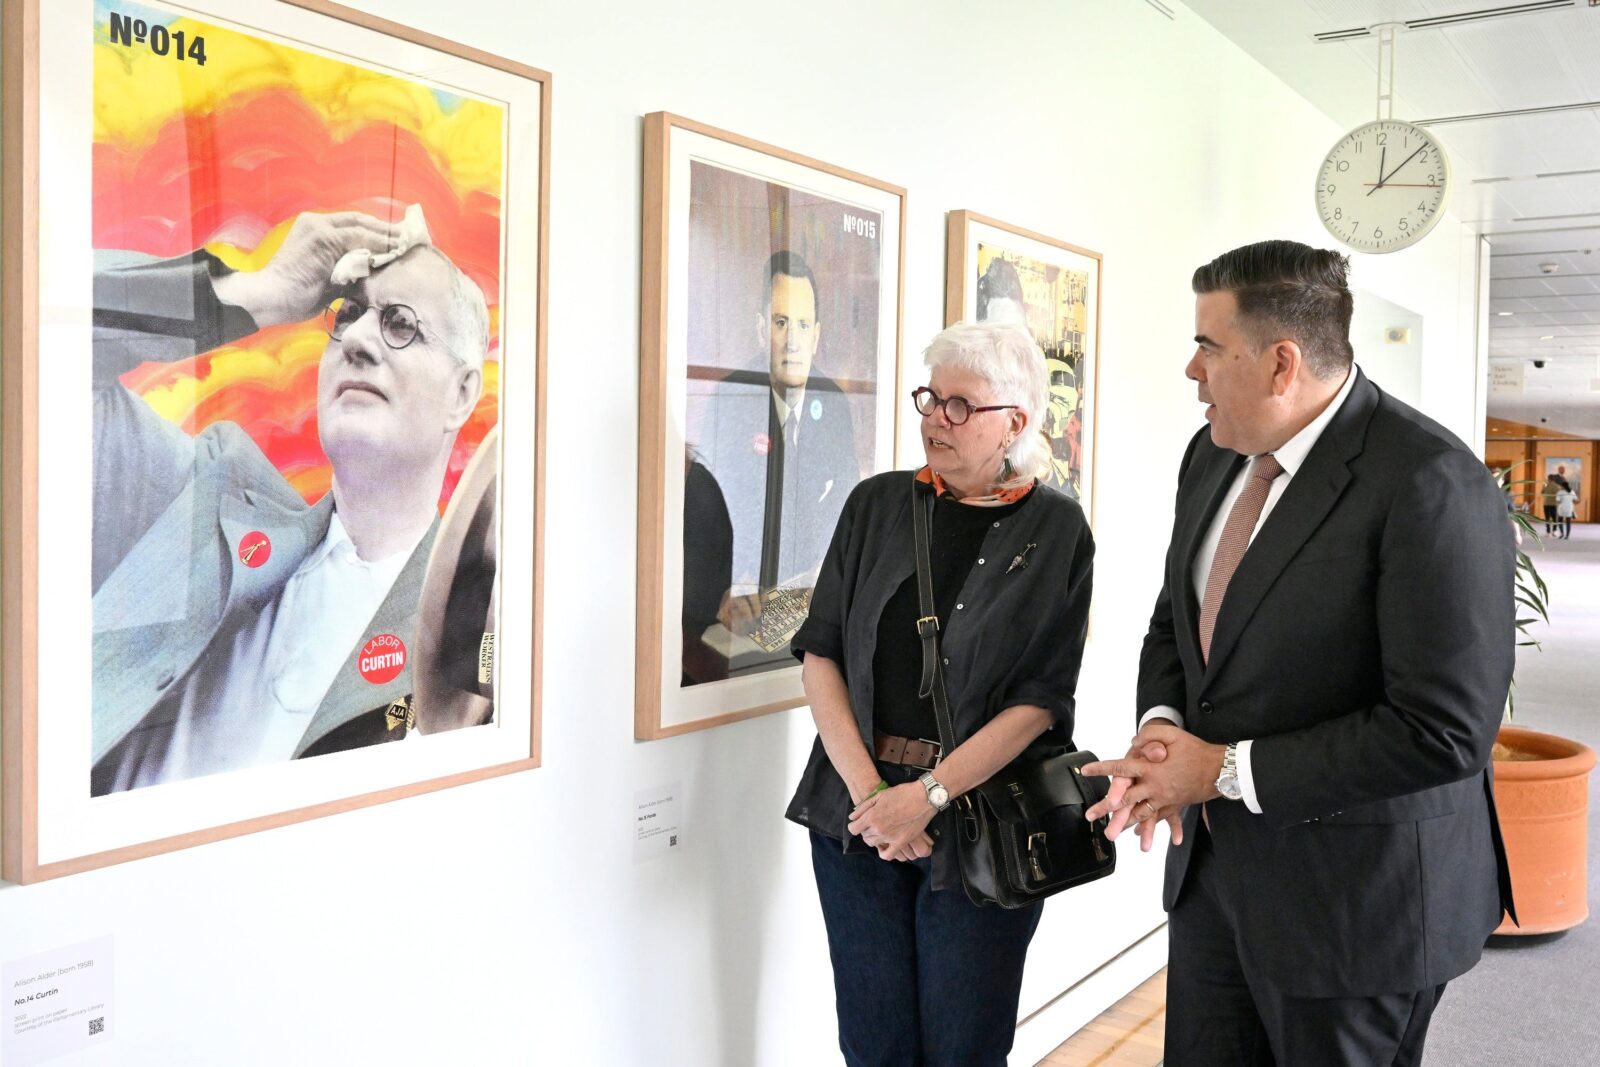 A man and woman looking at art work hanging on a wall and having a conversation.